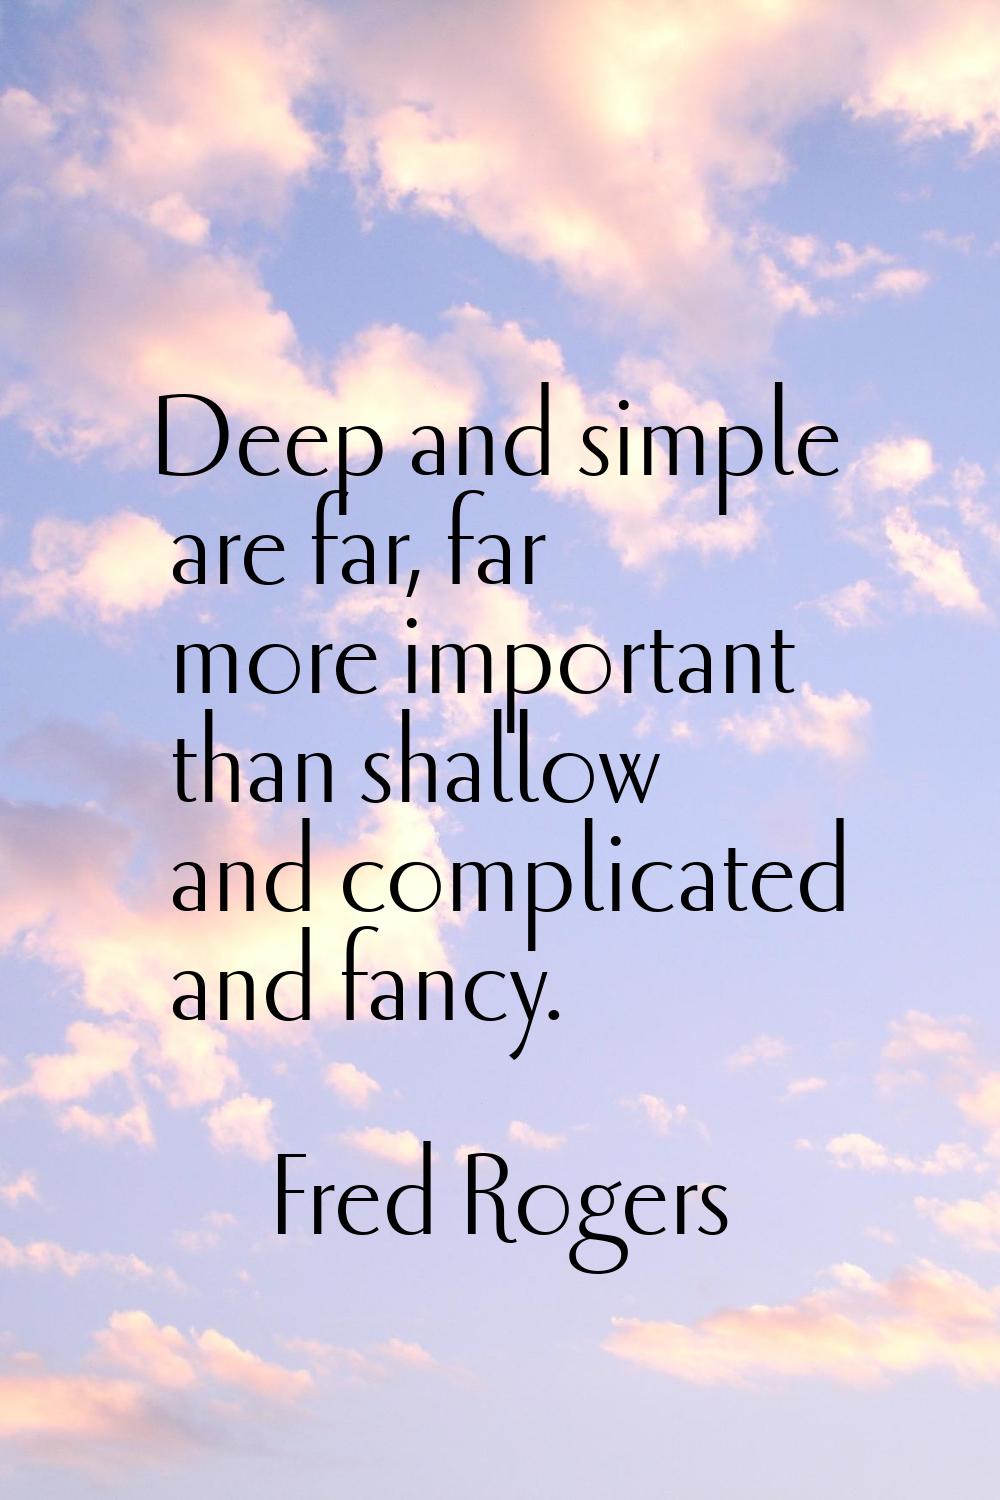 Deep and simple are far, far more important than shallow and complicated and fancy.